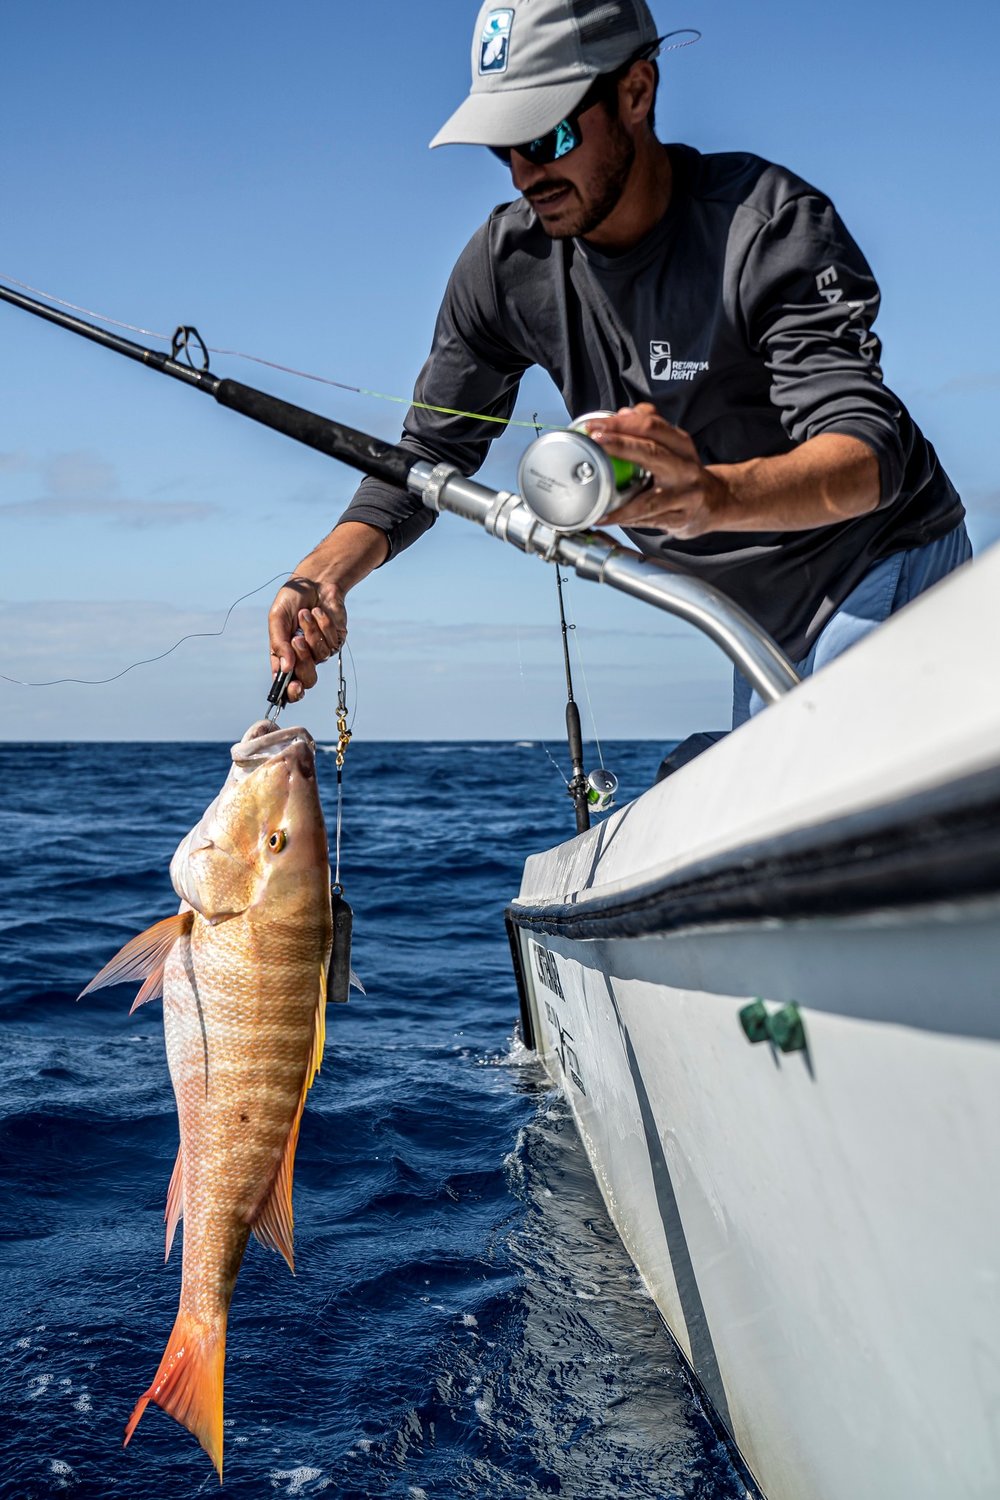 Gulf of Mexico reef fish anglers 18 years and older are now eligible to visit the Return ‘Em Right website, review best release practices, and receive a package of release gear to use out on the water.